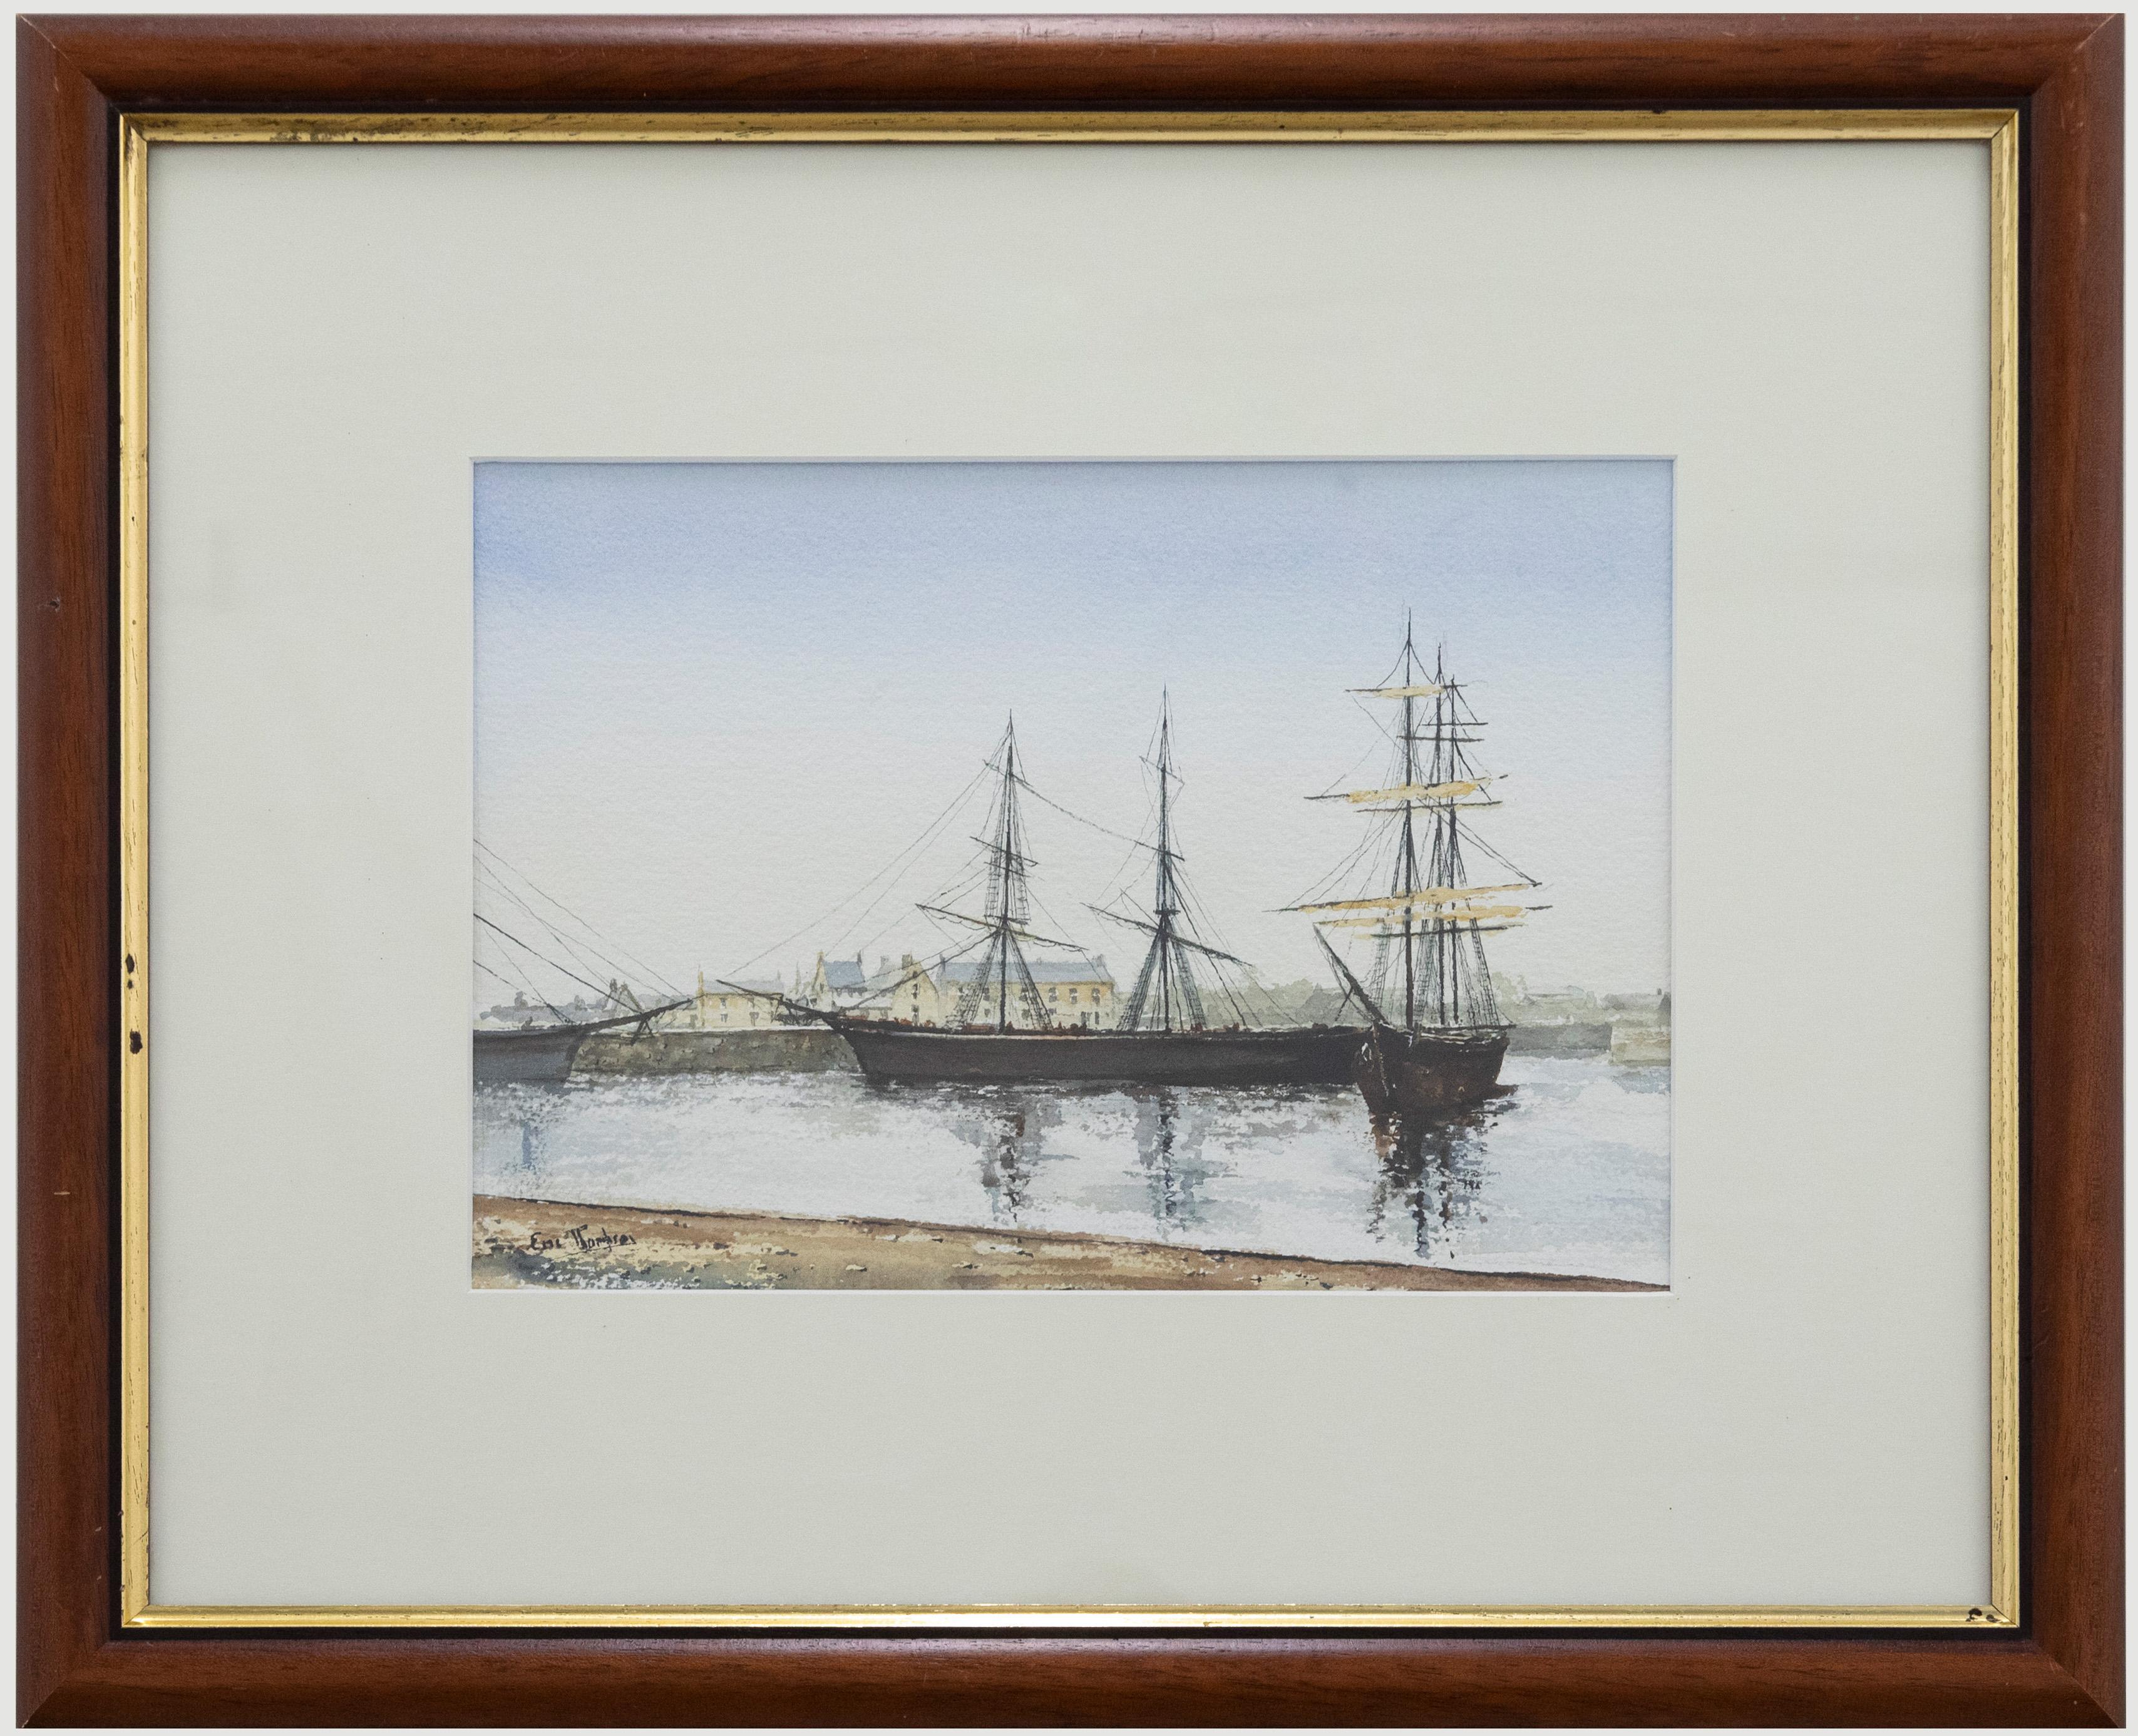 A delightful watercolour scene depicting ships moored at St Sampson's harbour in Guernsey. Signed and dated to the lower right. Presented in a wooden frame with a gilt window. On paper.